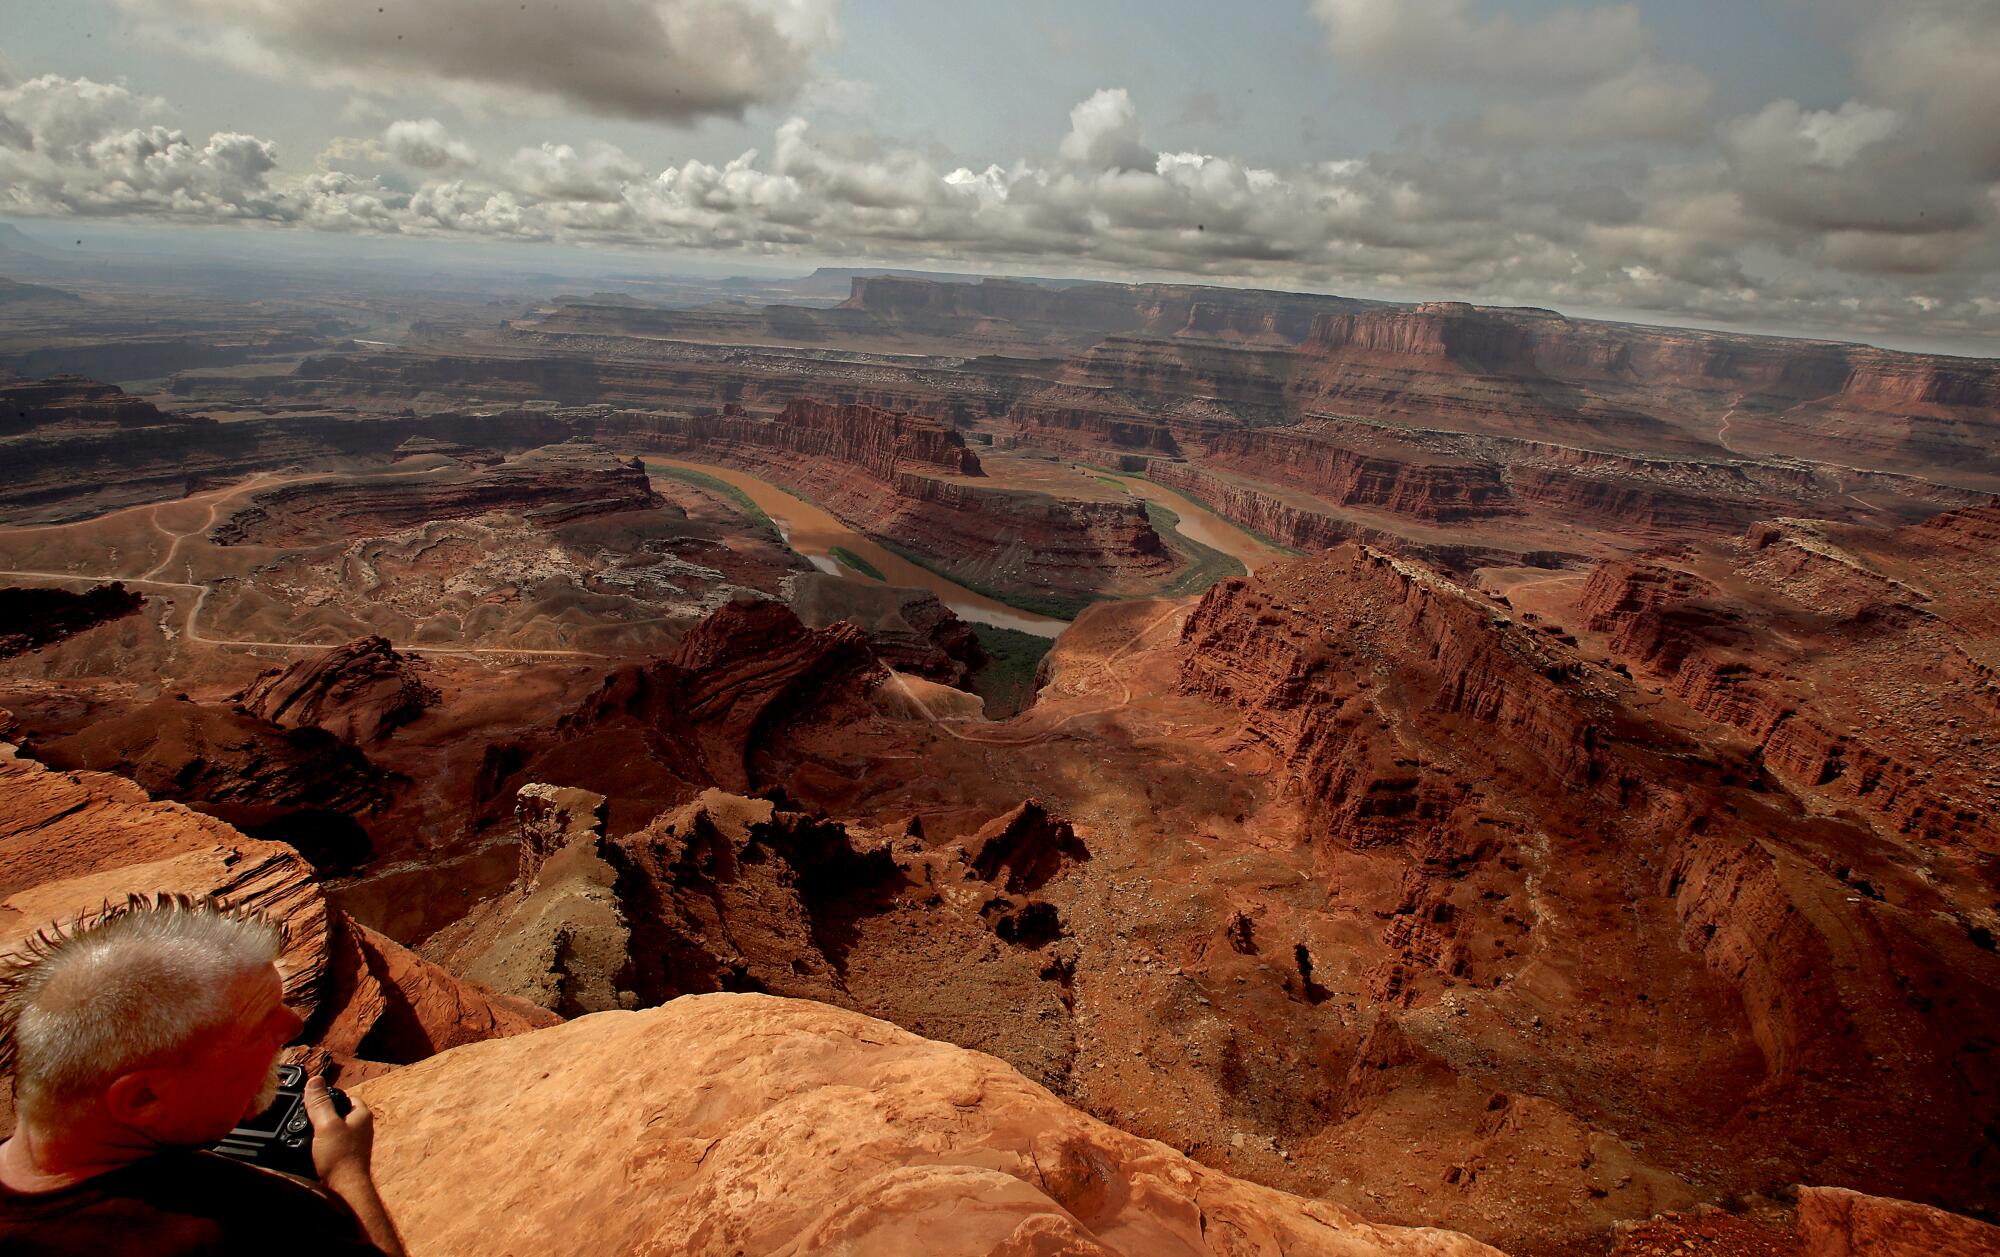  A visitor takes in a view of the Colorado River and Canyonlands National Park at Dead Horse Point near Moab, Utah.